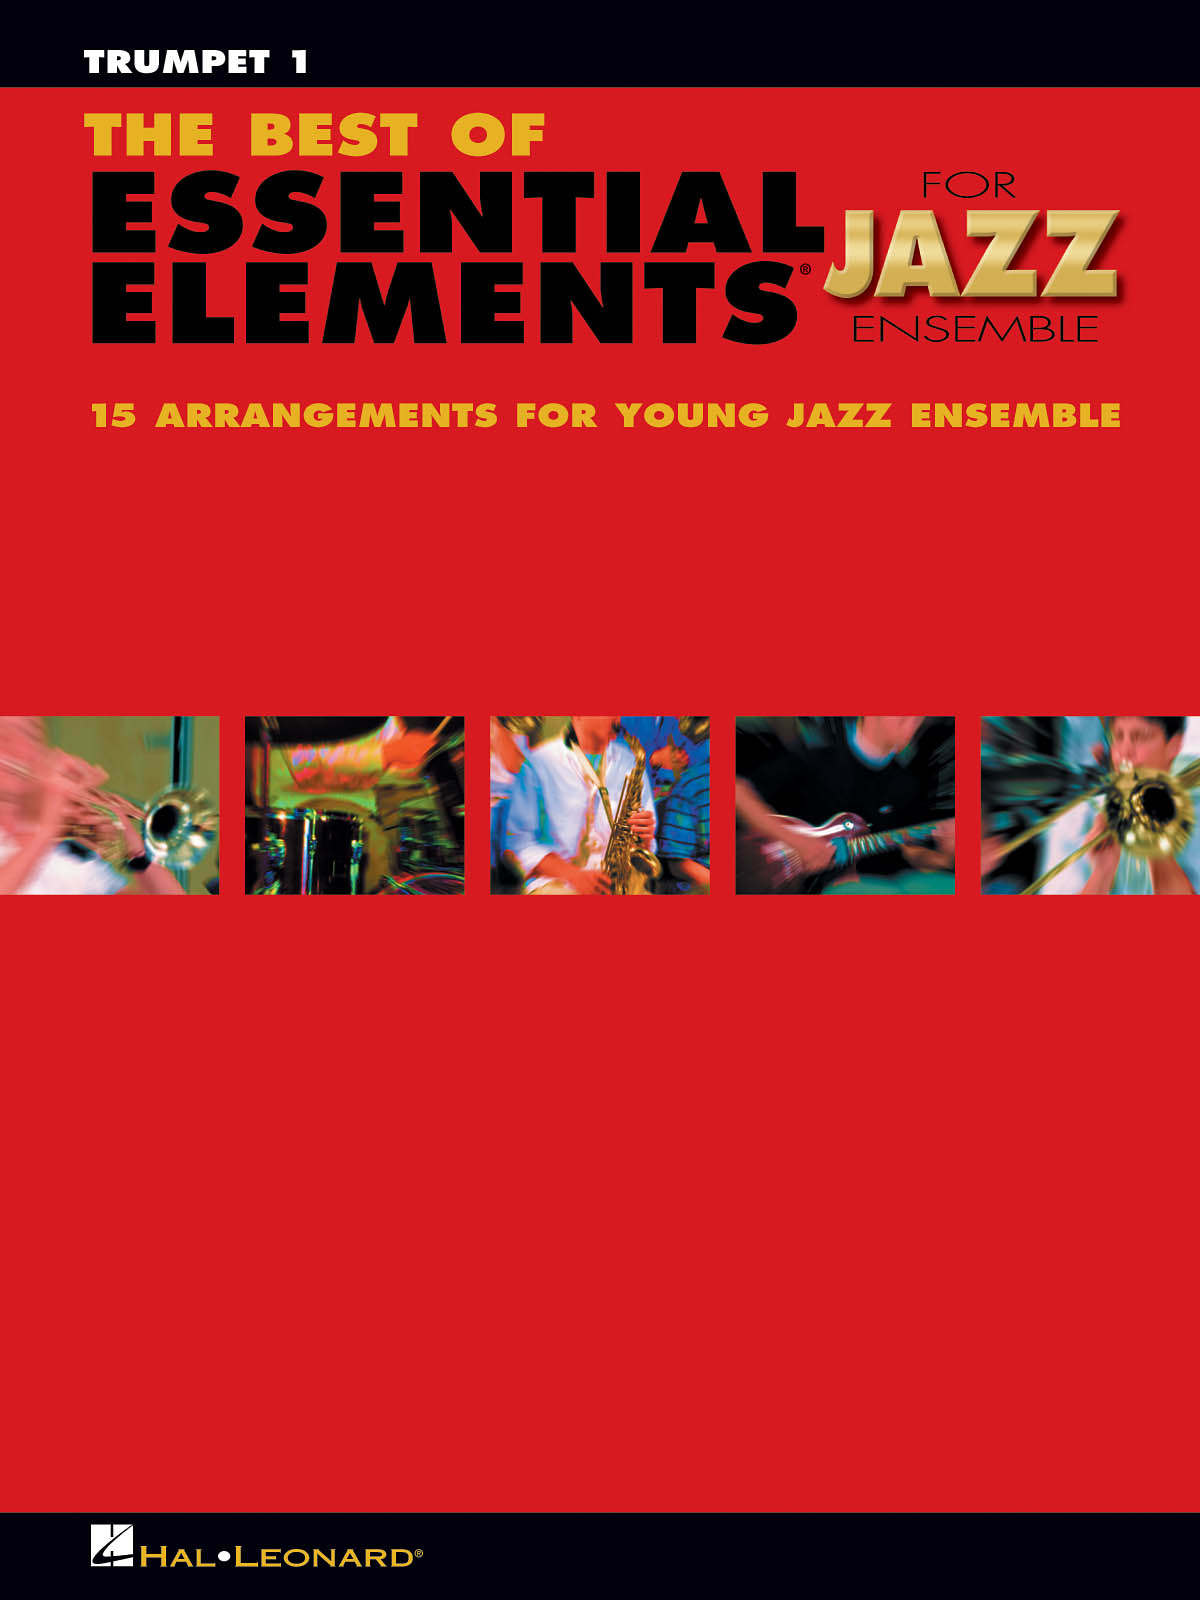 The Best of Essential Elements For Jazz Ensemble (Trompet 1)